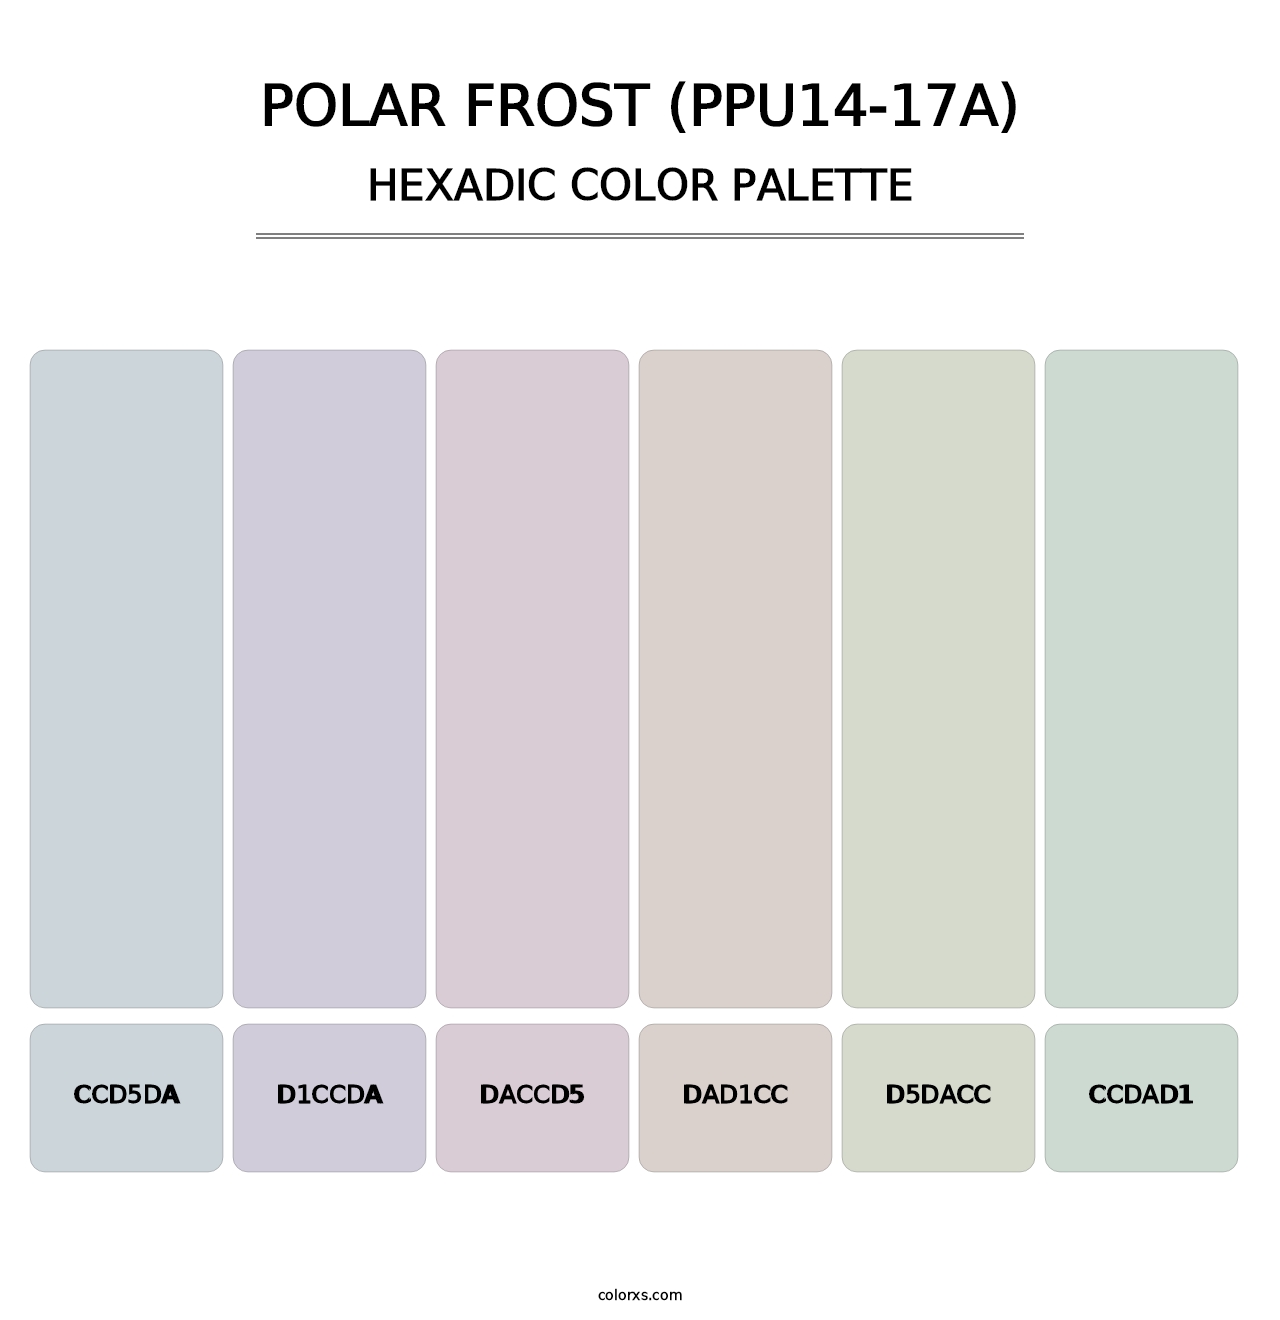 Polar Frost (PPU14-17A) - Hexadic Color Palette